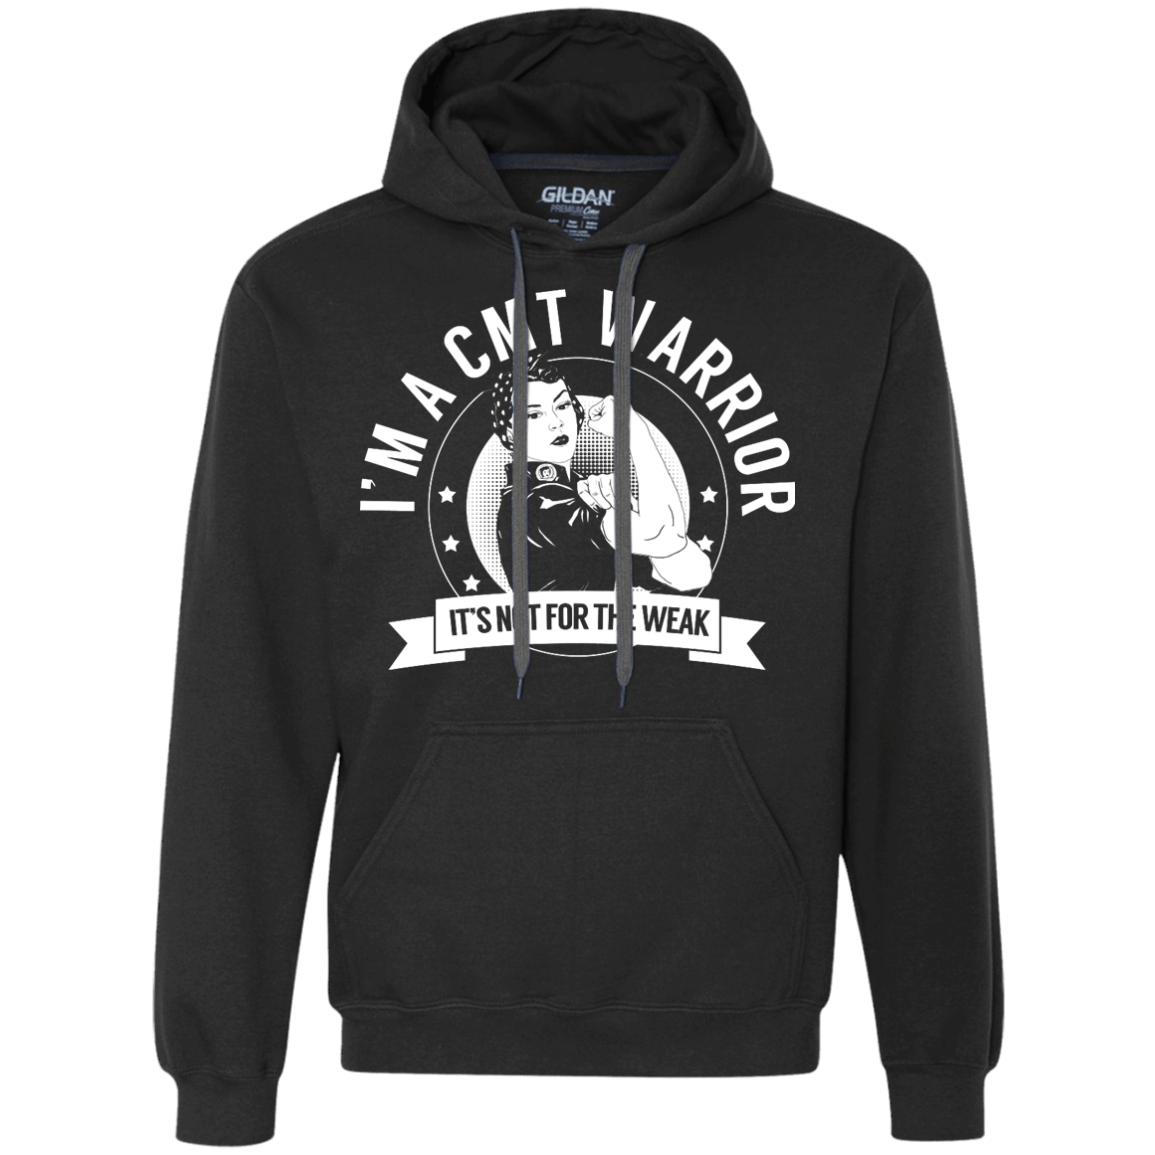 Charcot-Marie-Tooth Disease- CMT Warrior Not For The Weak Pullover Hoodie - The Unchargeables